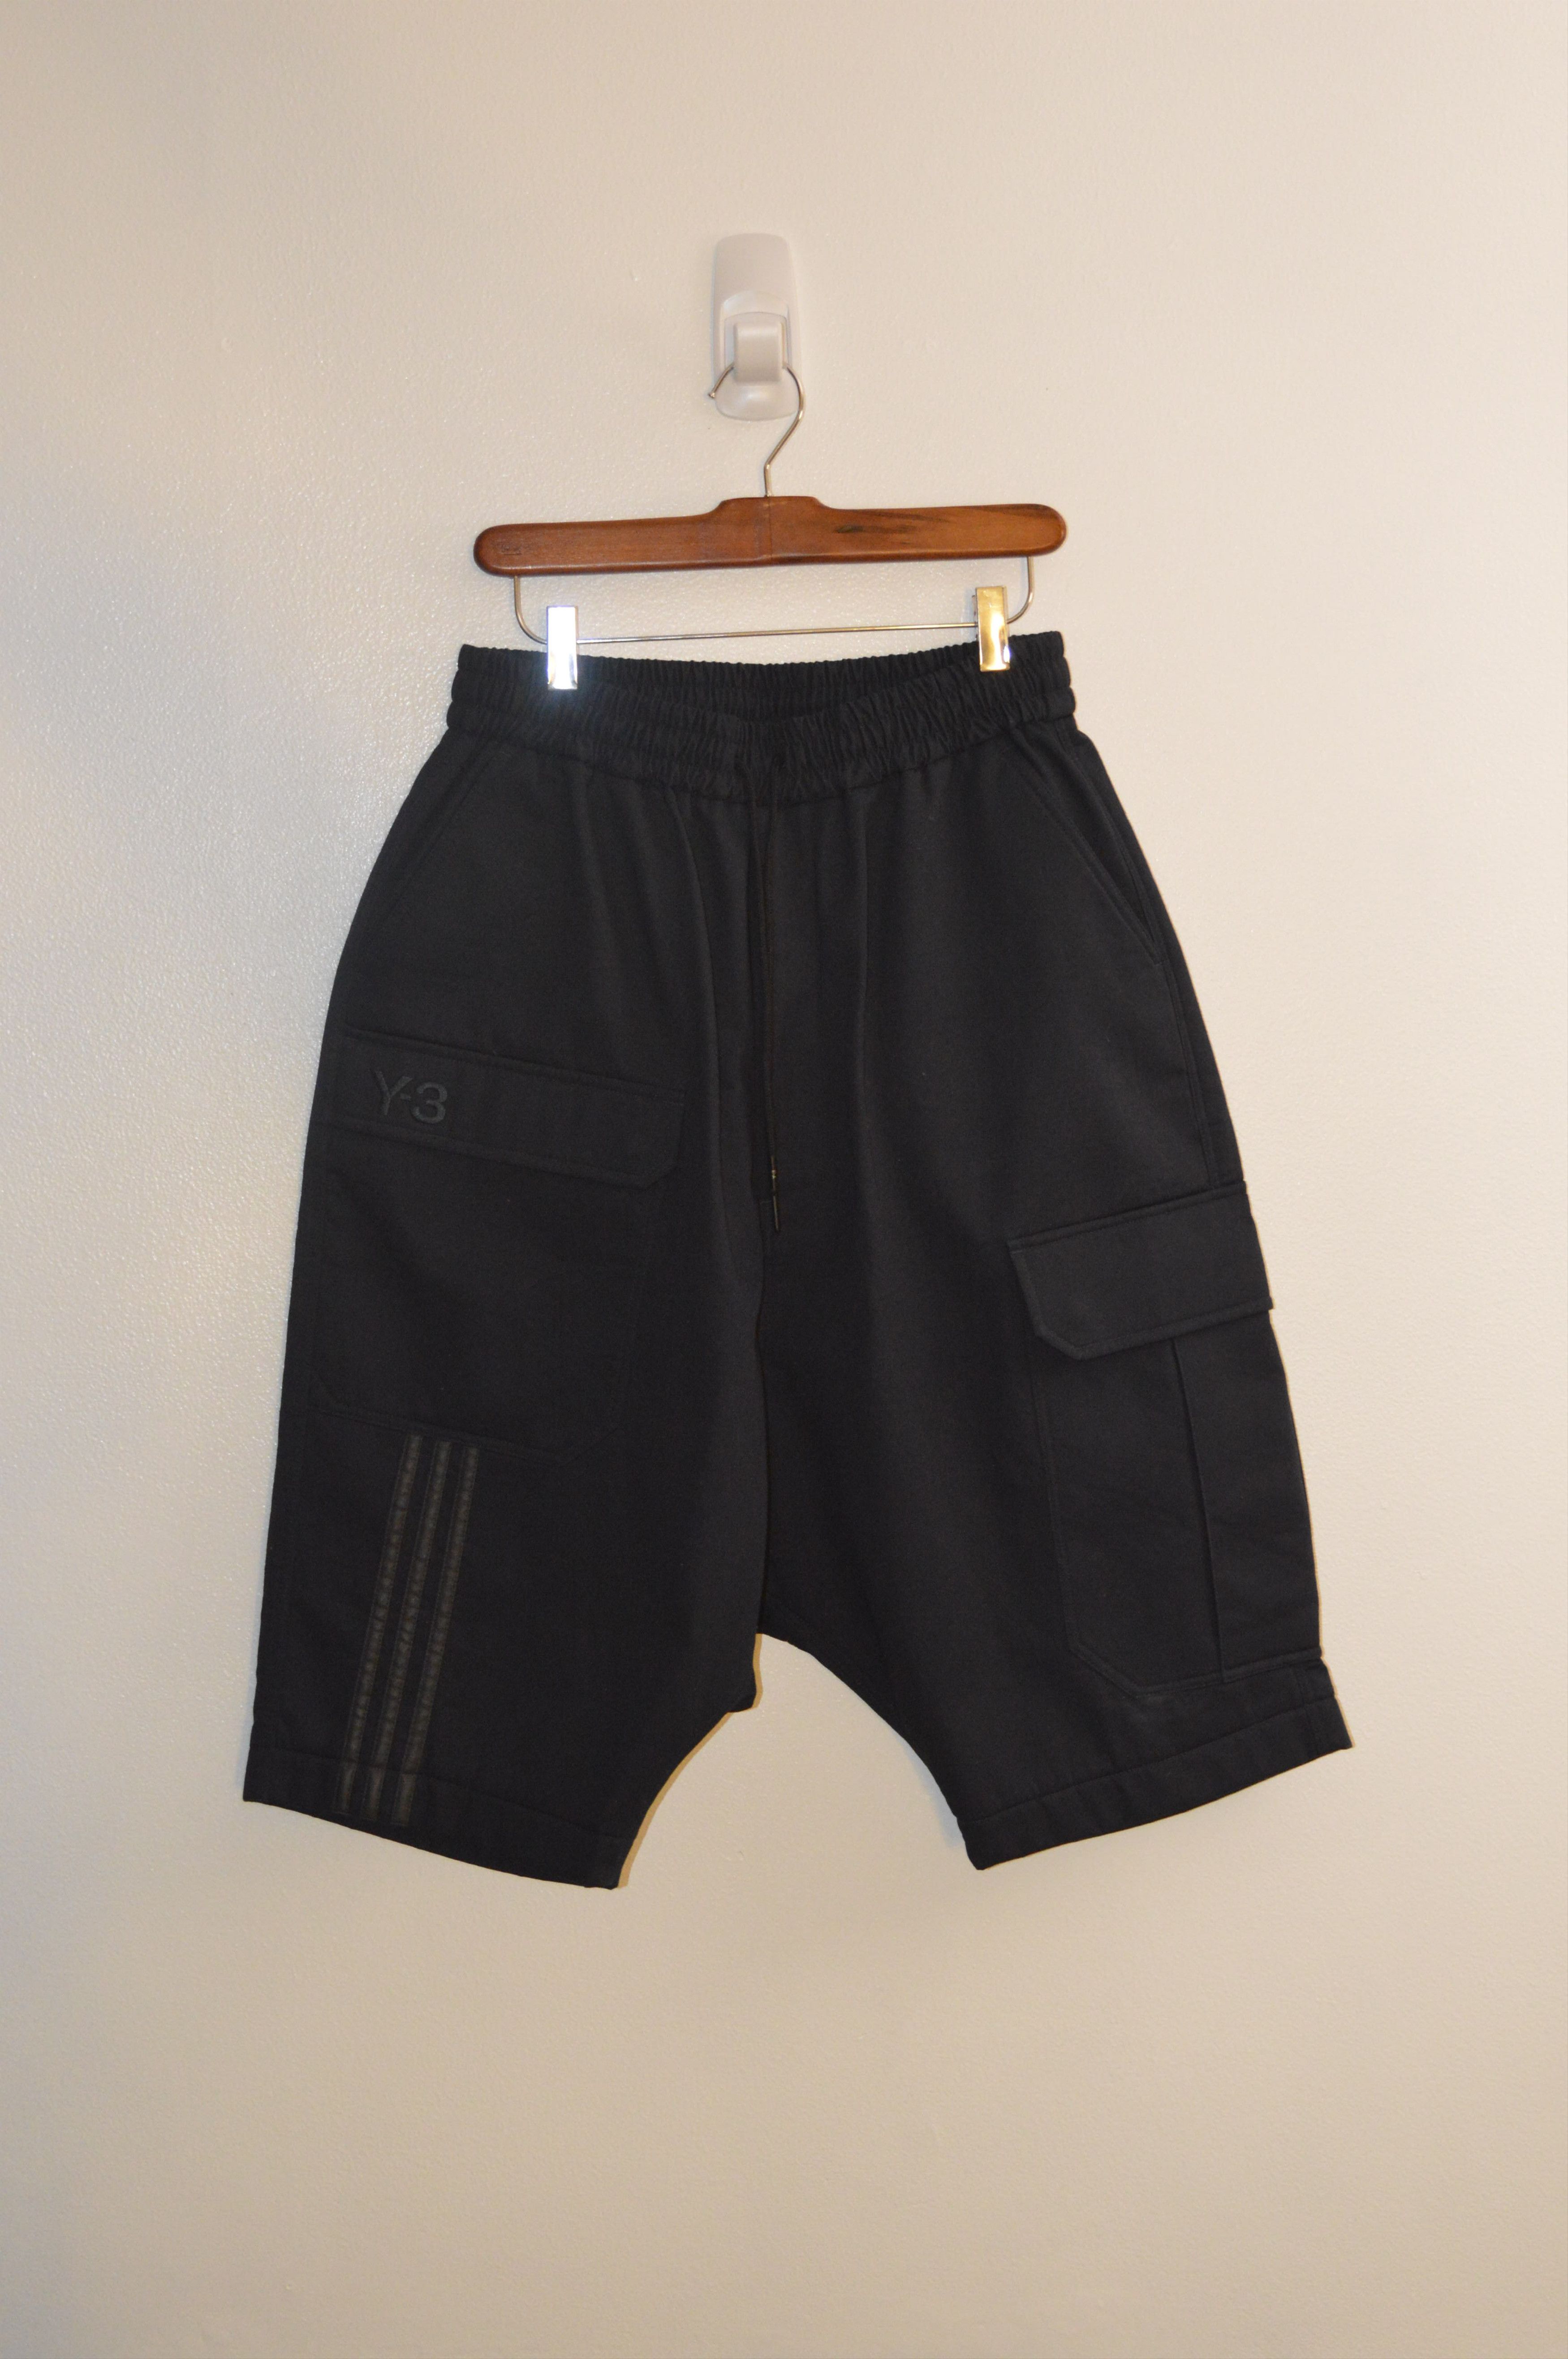 Y-3 (priced to sell)Drop Crotch Shorts Size US 30 / EU 46 - 8 Thumbnail